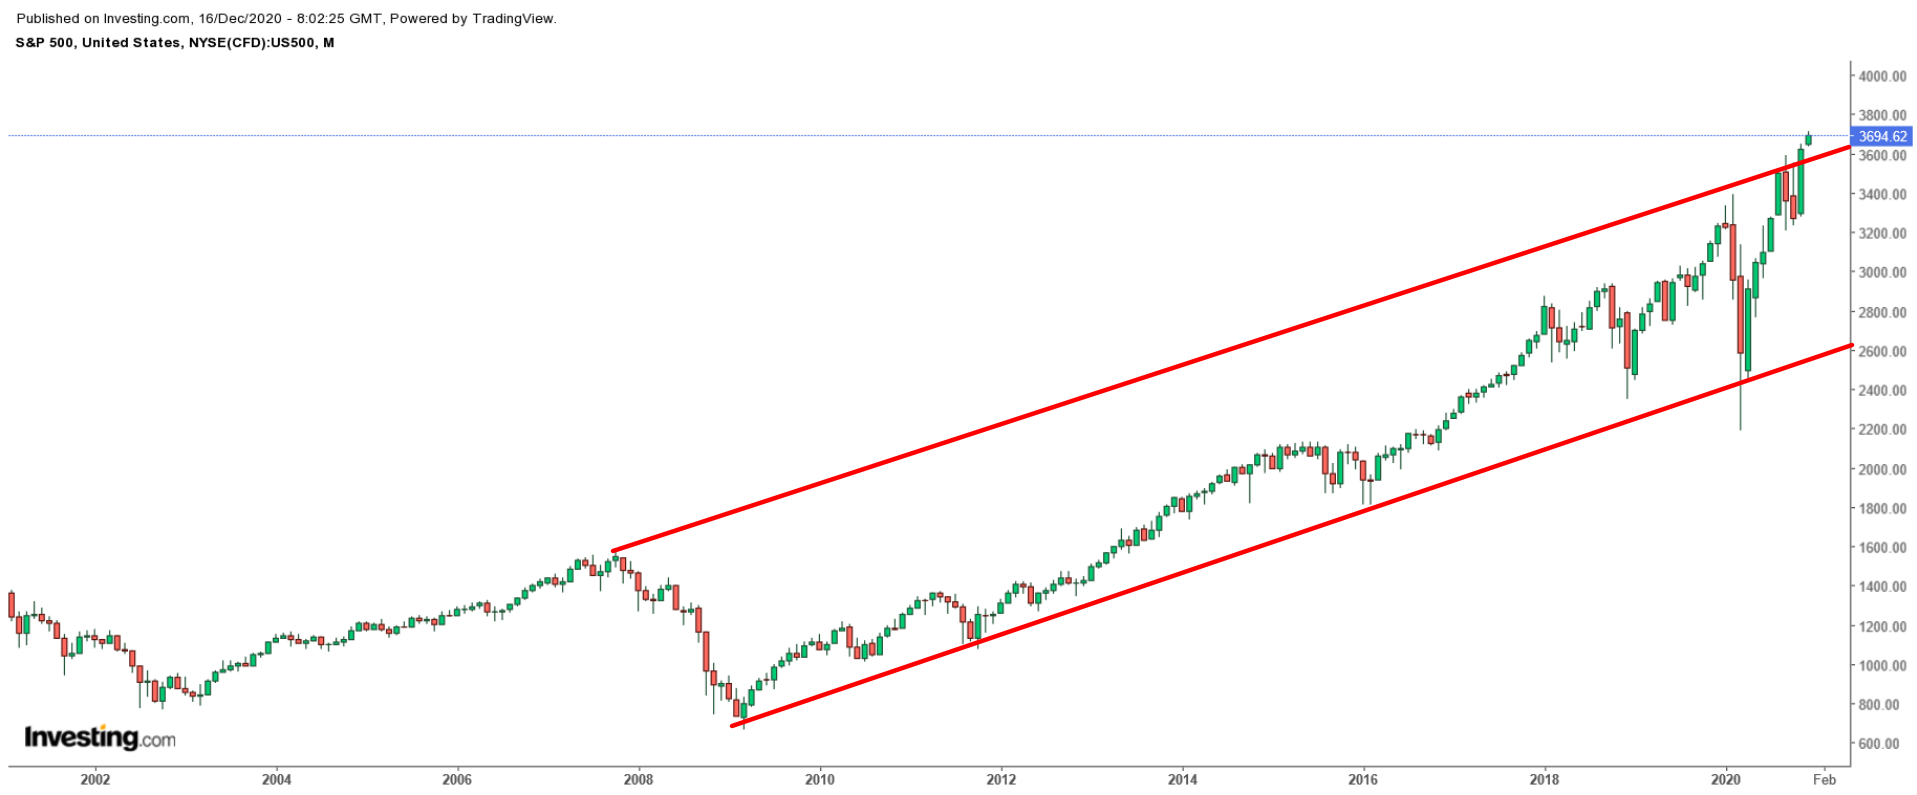 SPX Monthly 2000-2020